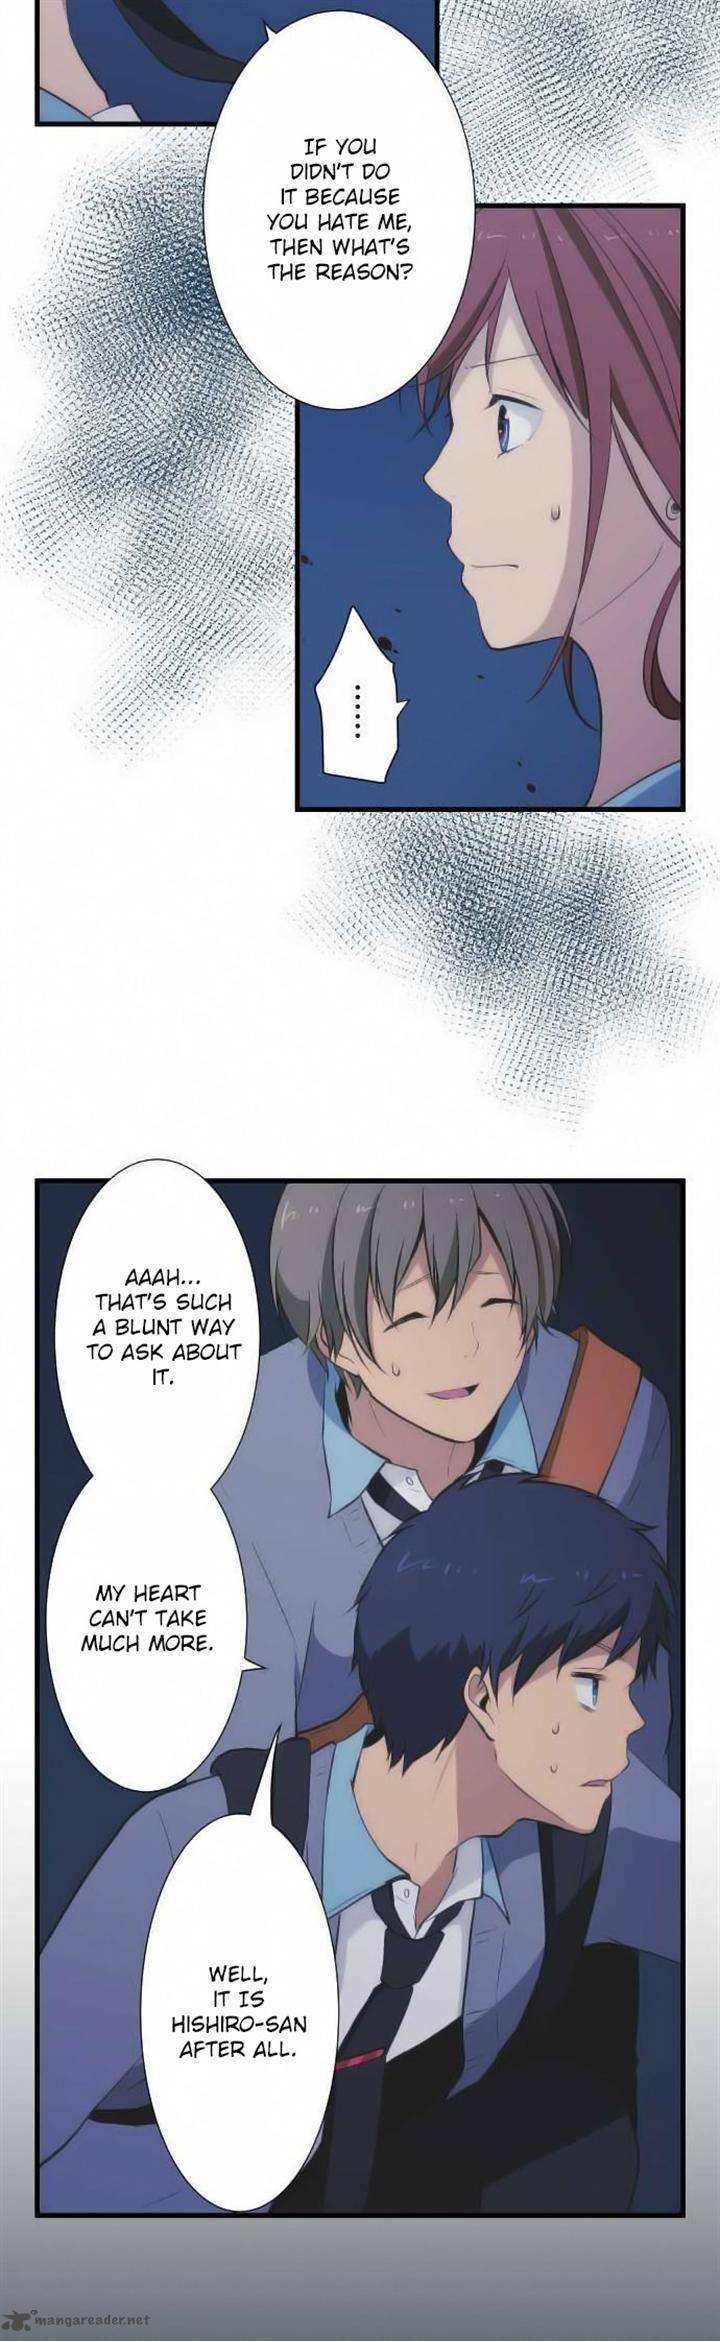 Relife 42 15